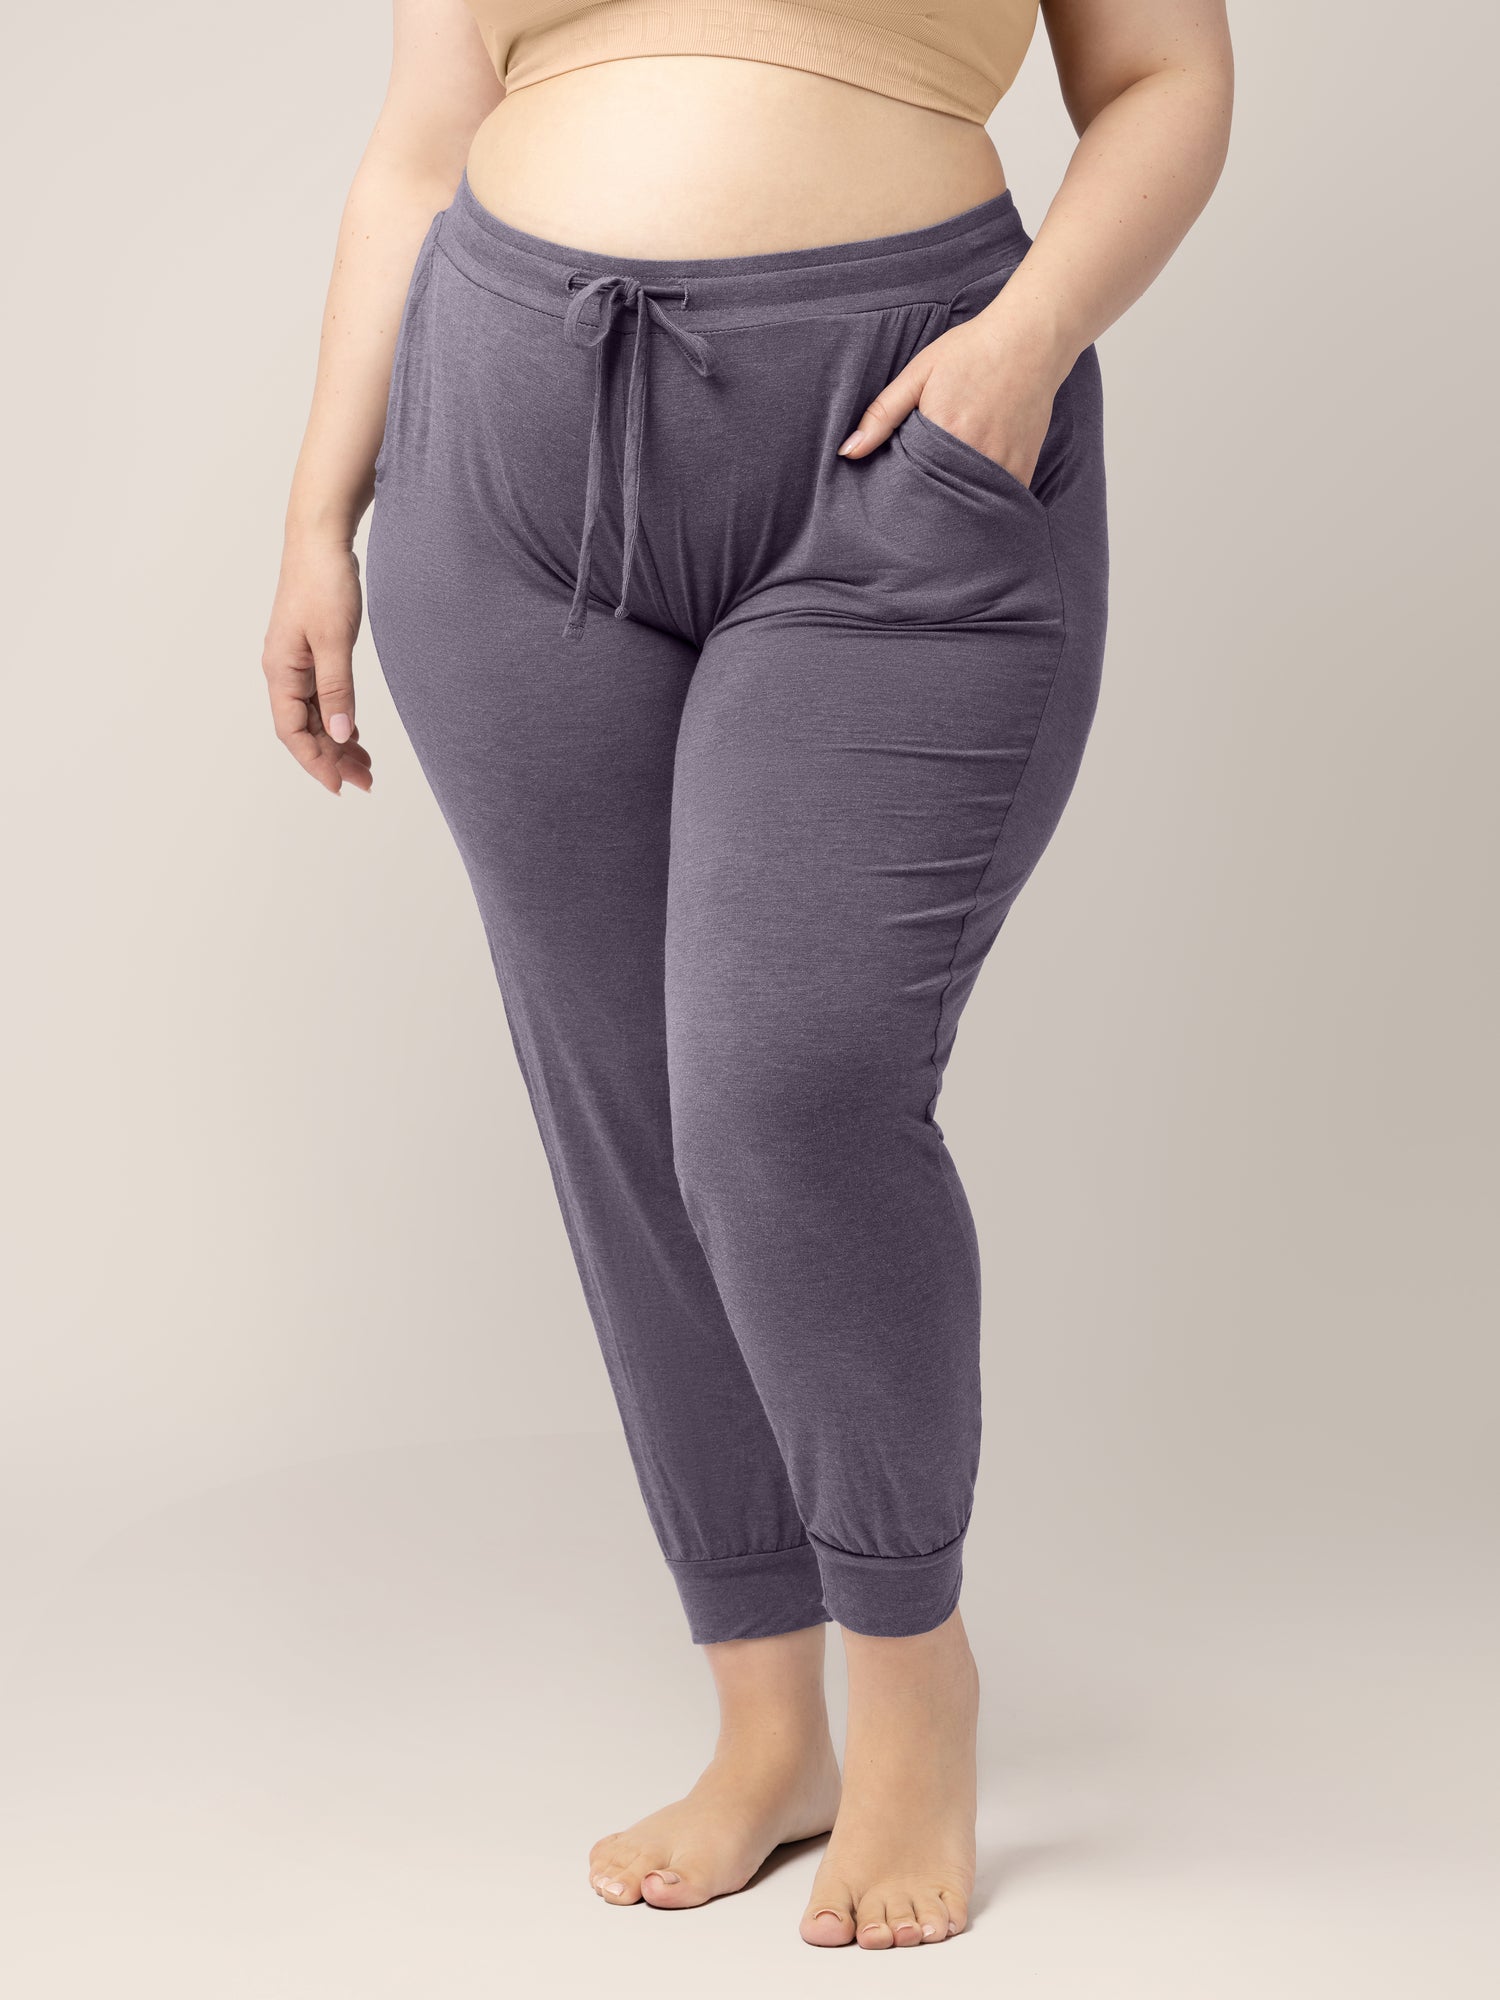 Bottom half of a model wearing the Everyday Lounge Jogger in Heathered Granite. @model_info:Rachel is 5'6" and wearing an X-Large Regular.